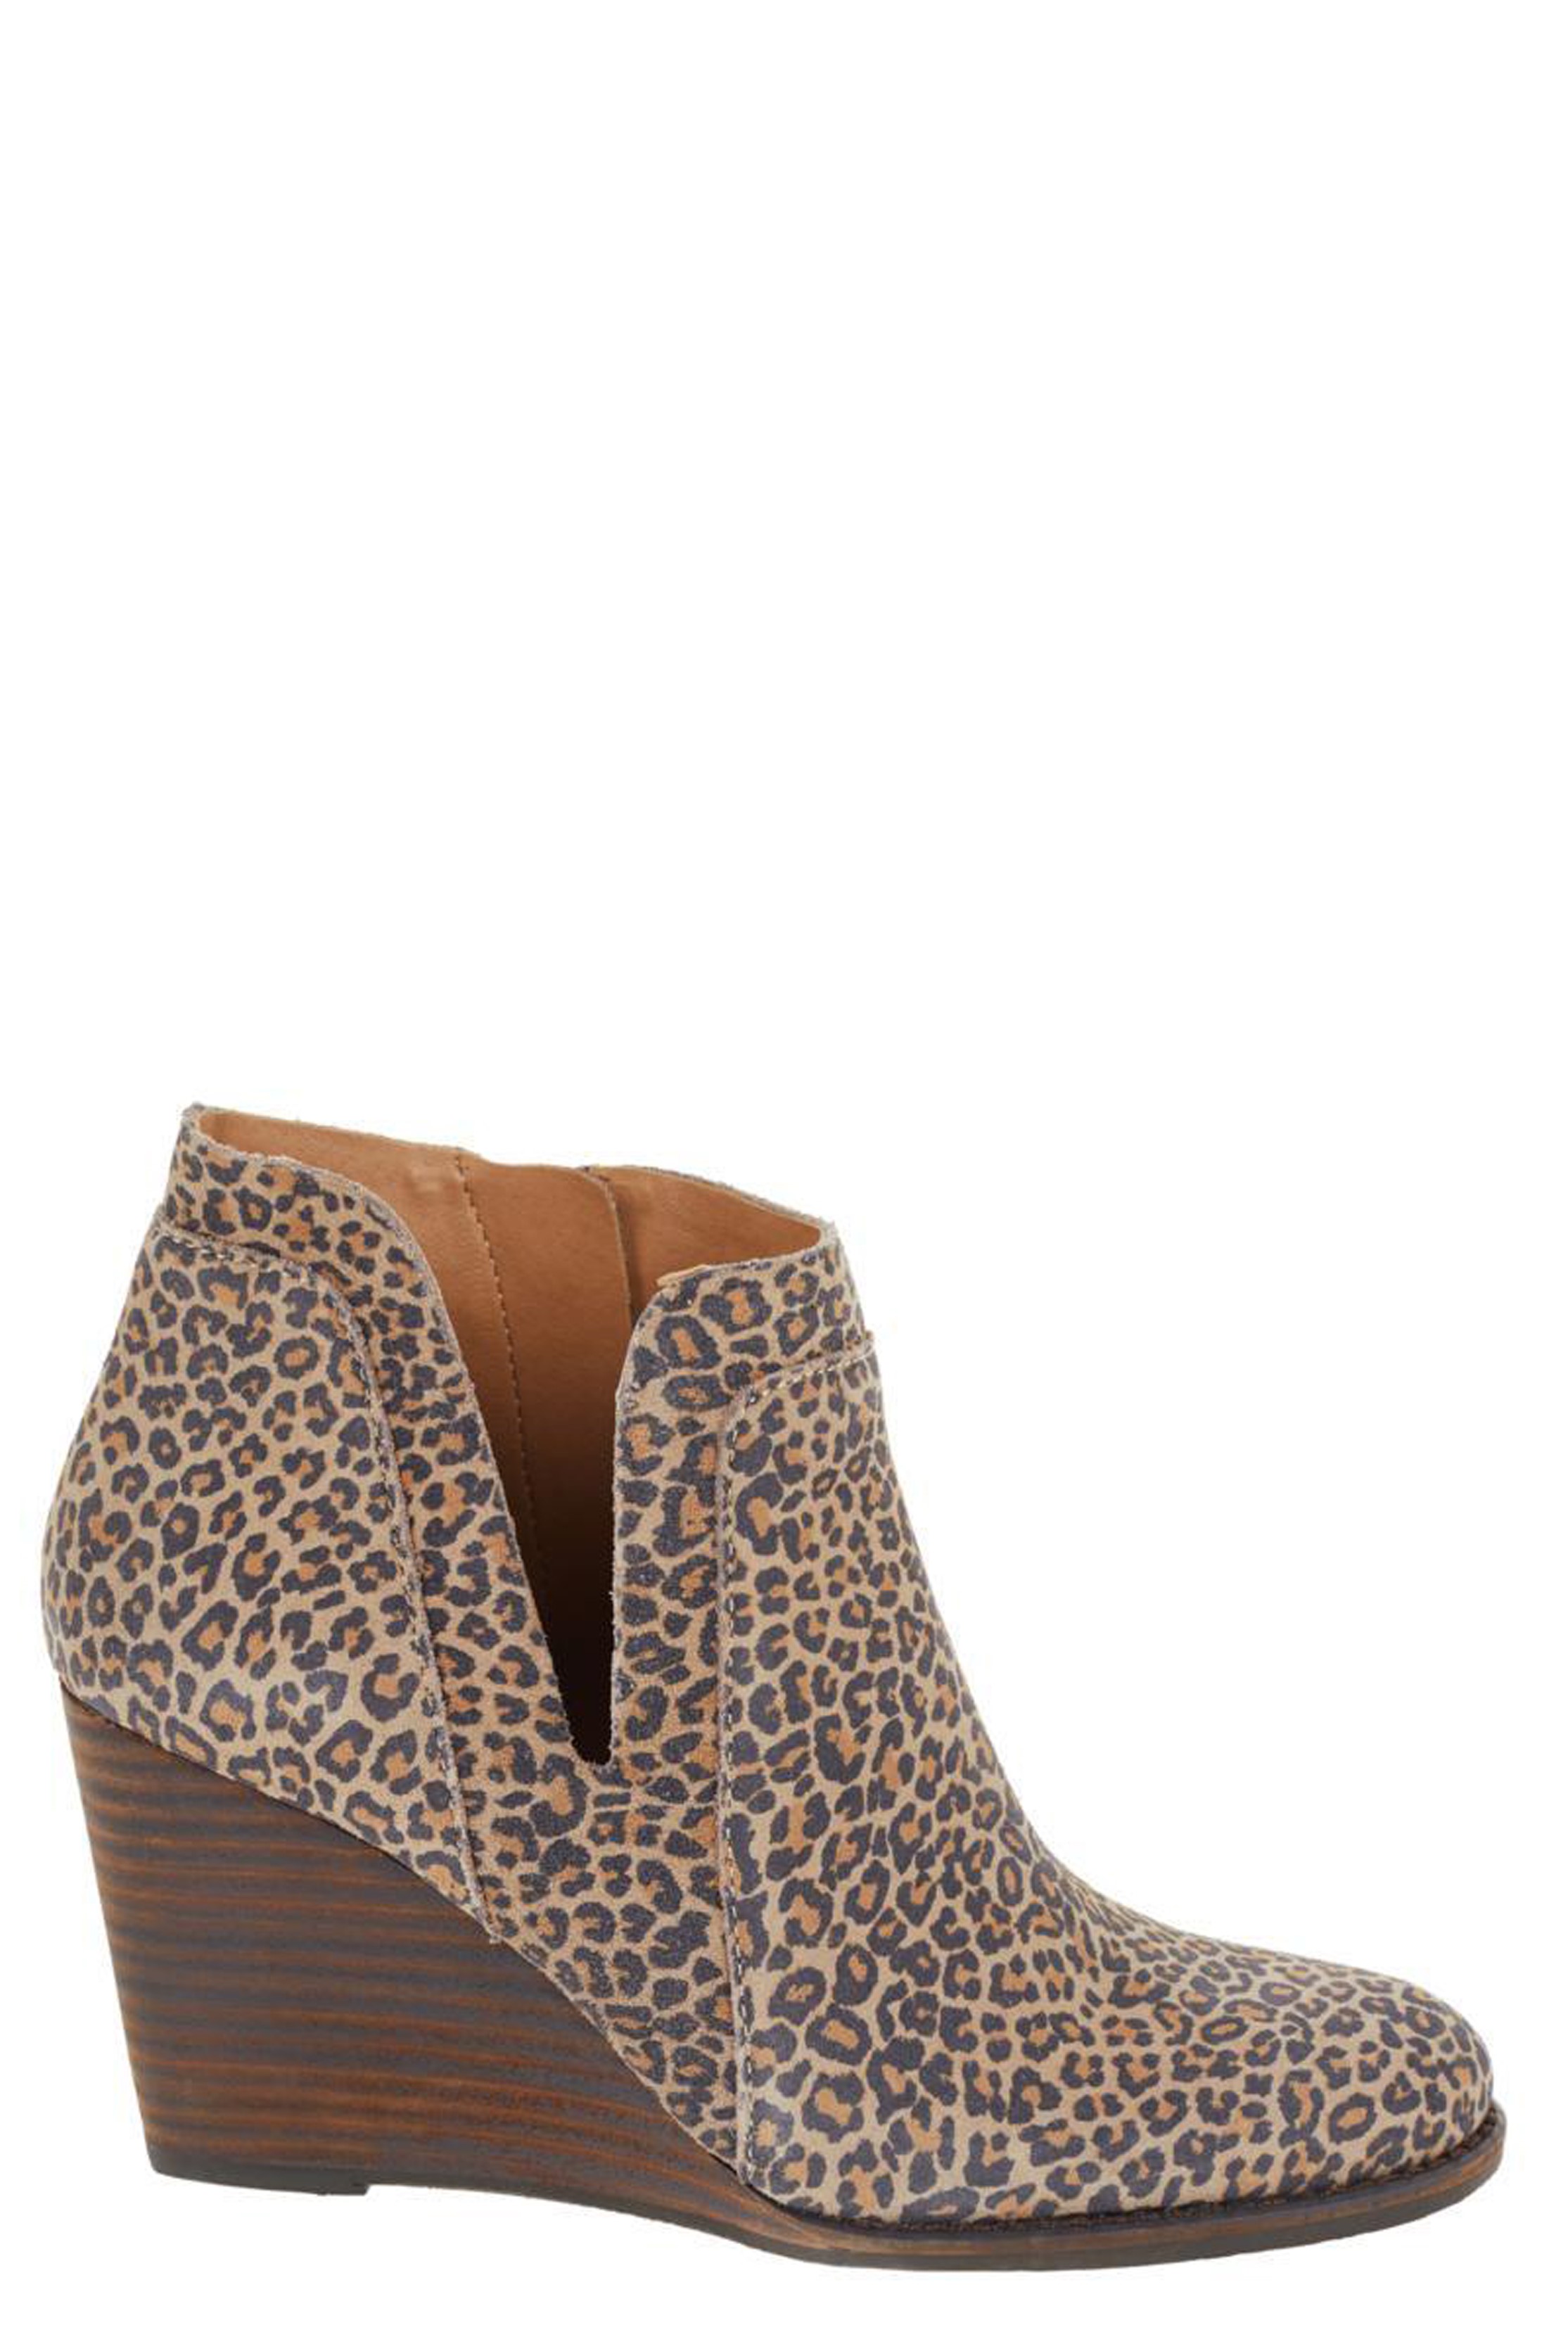 lucky brand leopard ankle boots